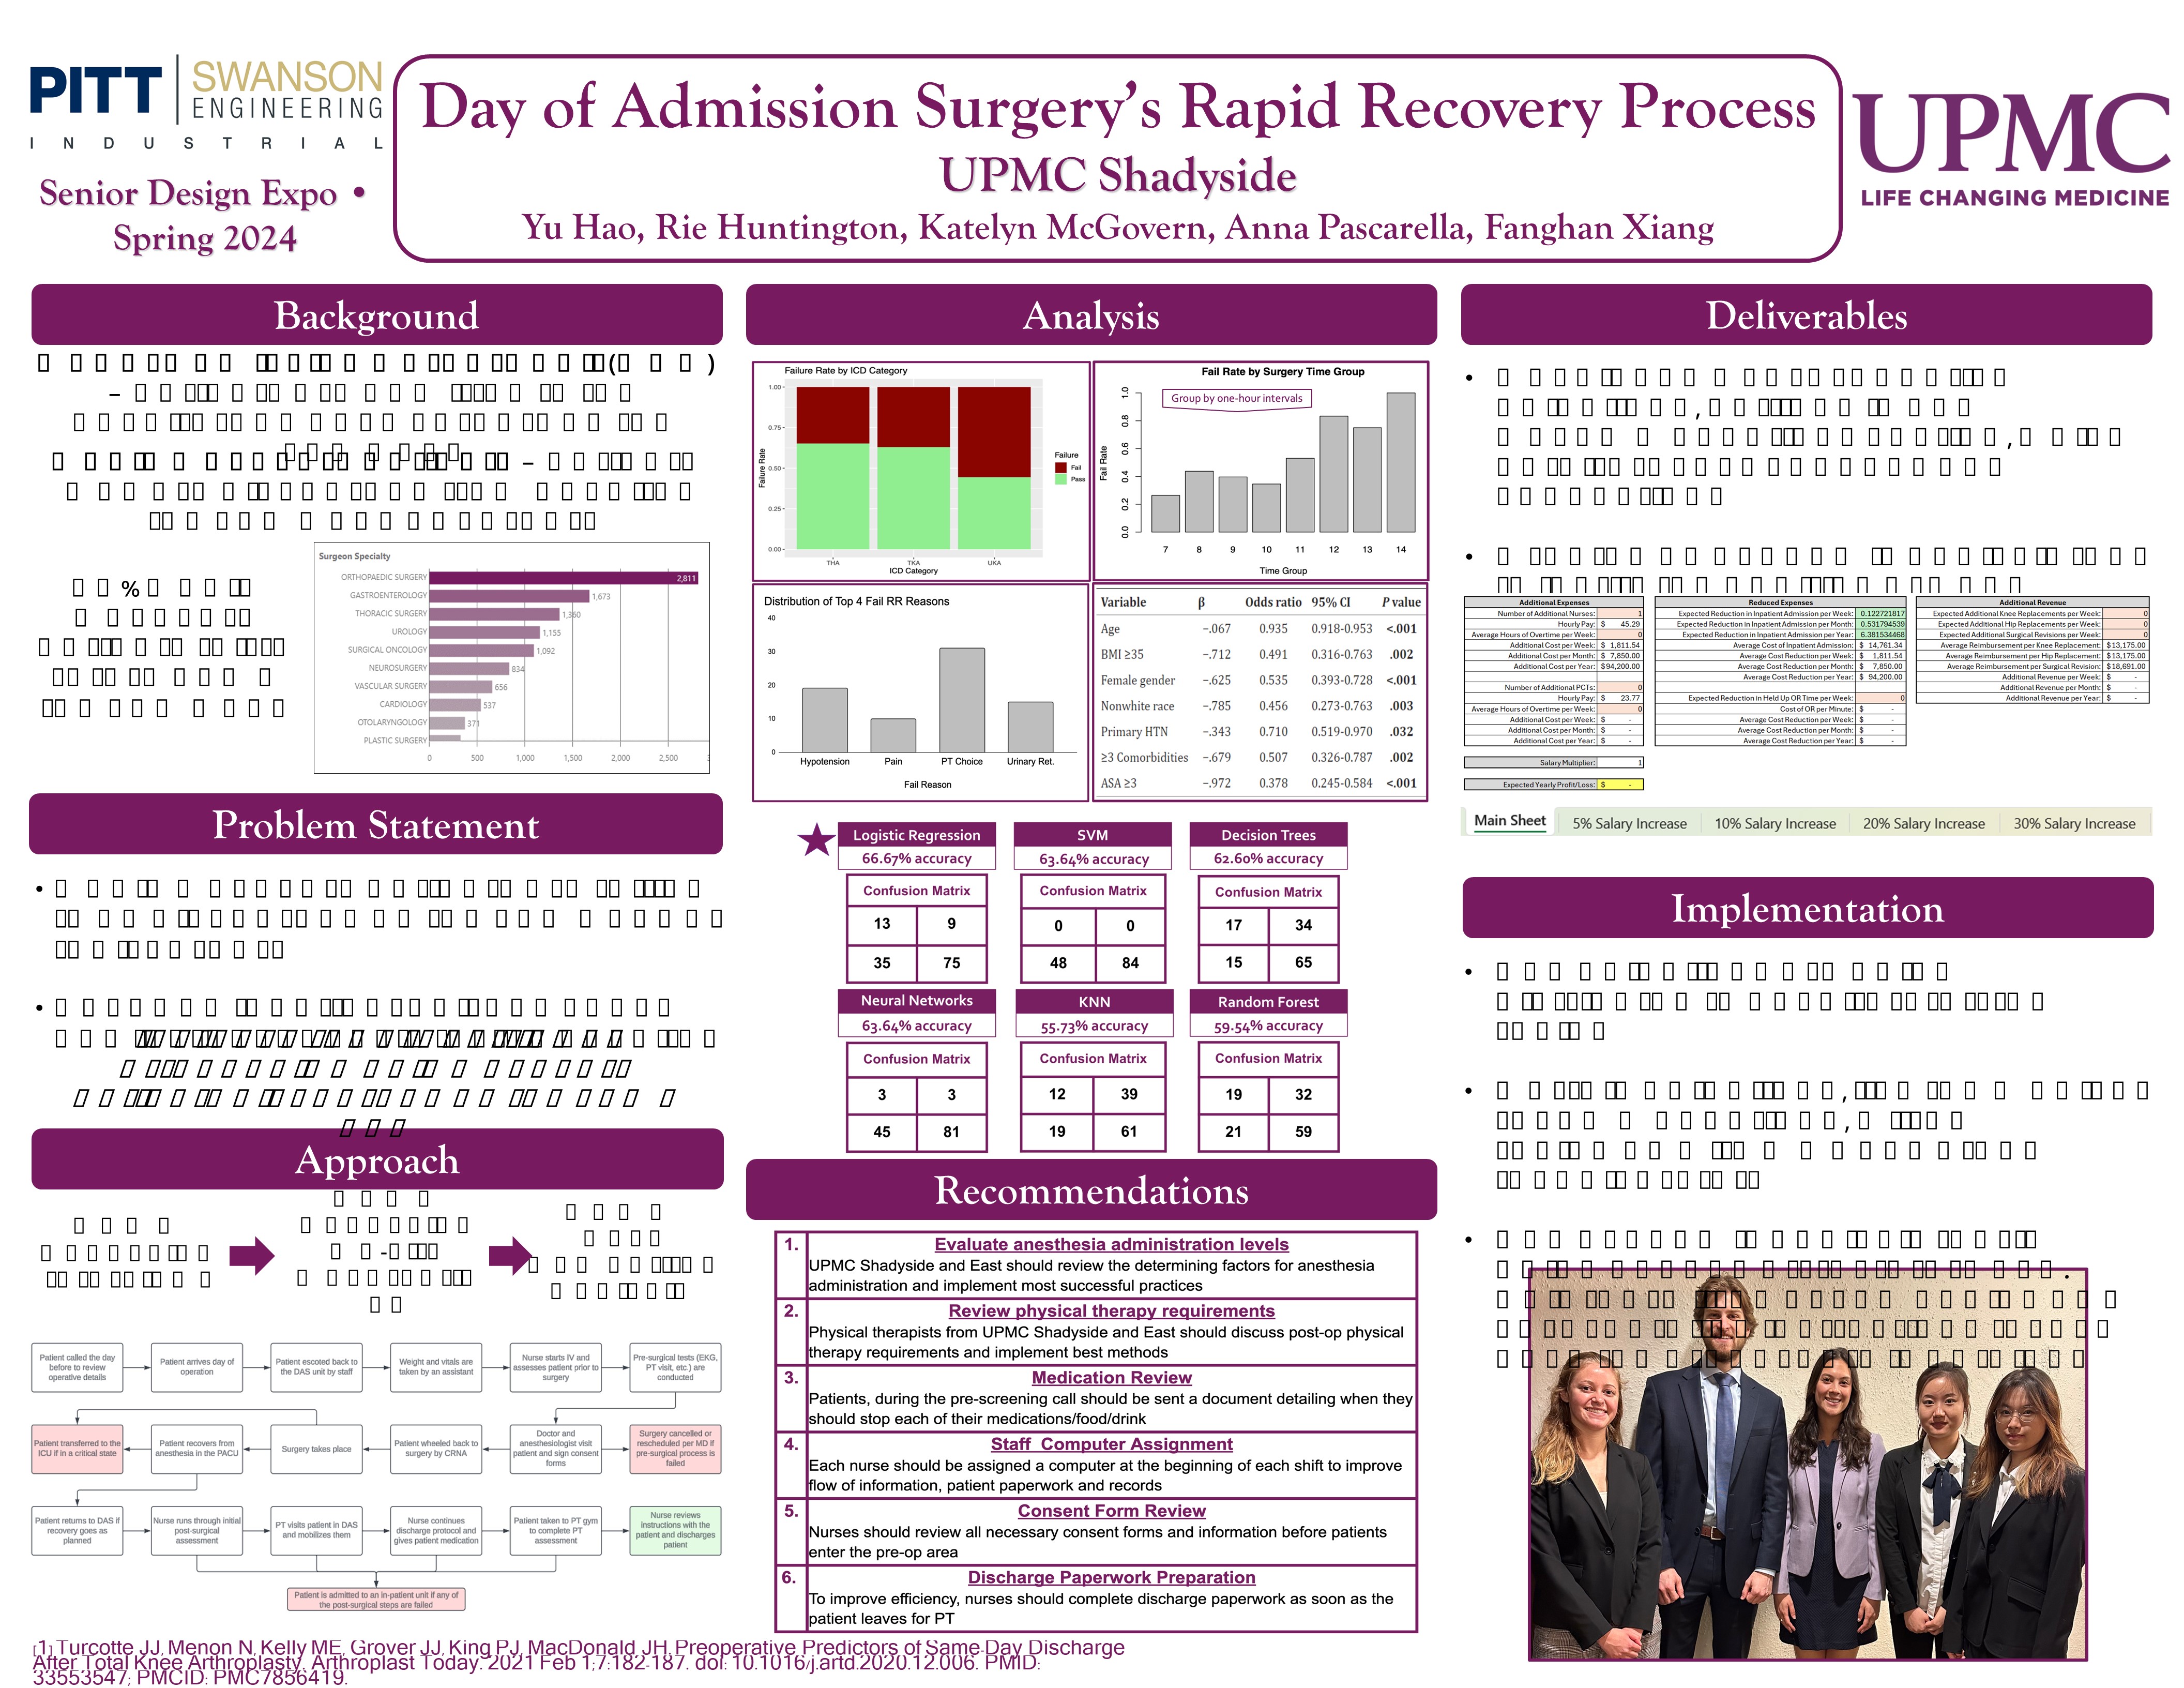 UPMC Shadyside Rapid Recovery research poster showing overview of project